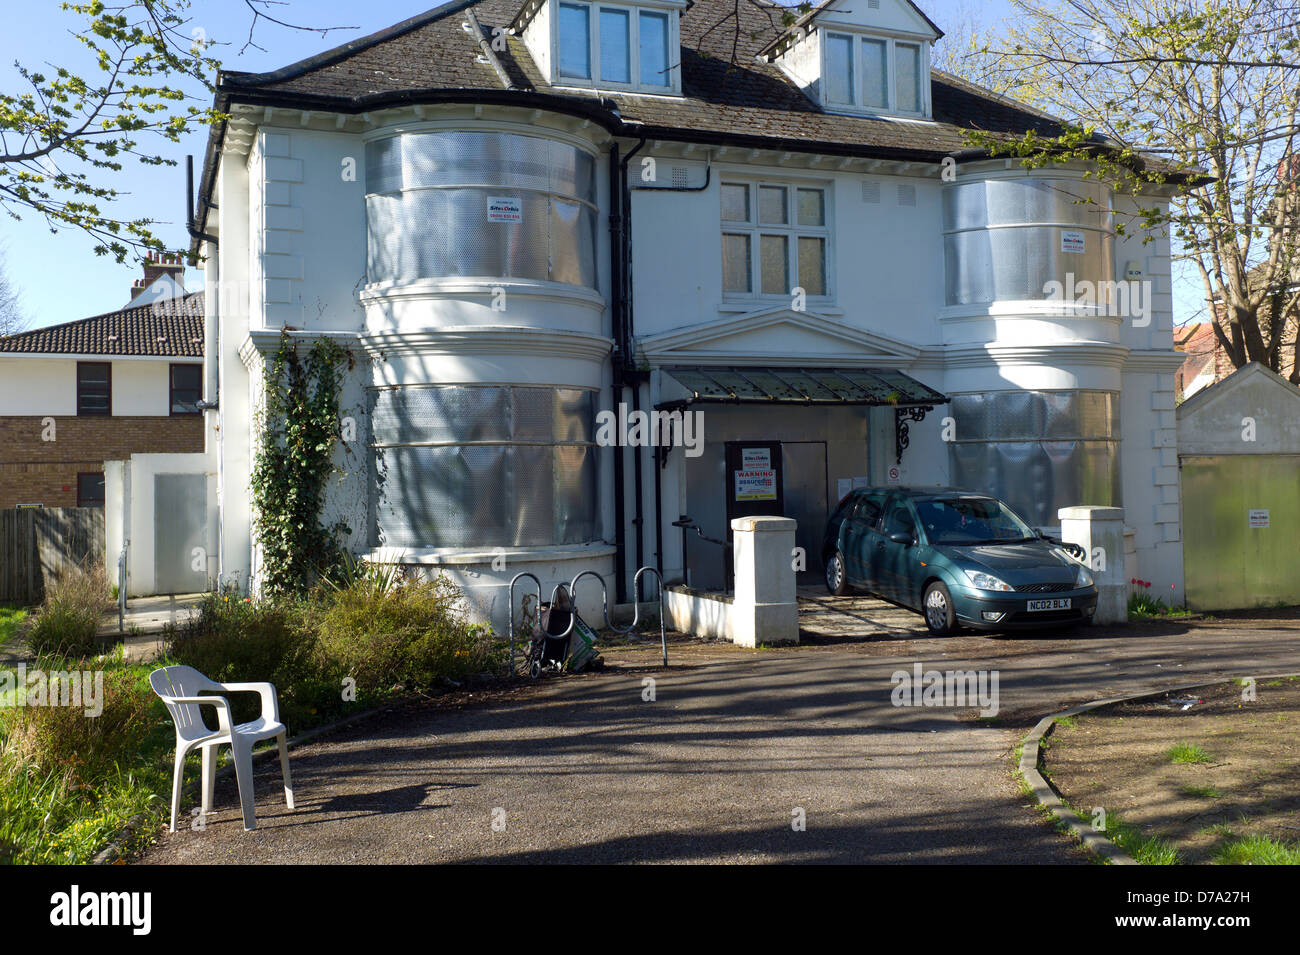 Large detached abandoned and boarded up house, Hove, UK Stock Photo